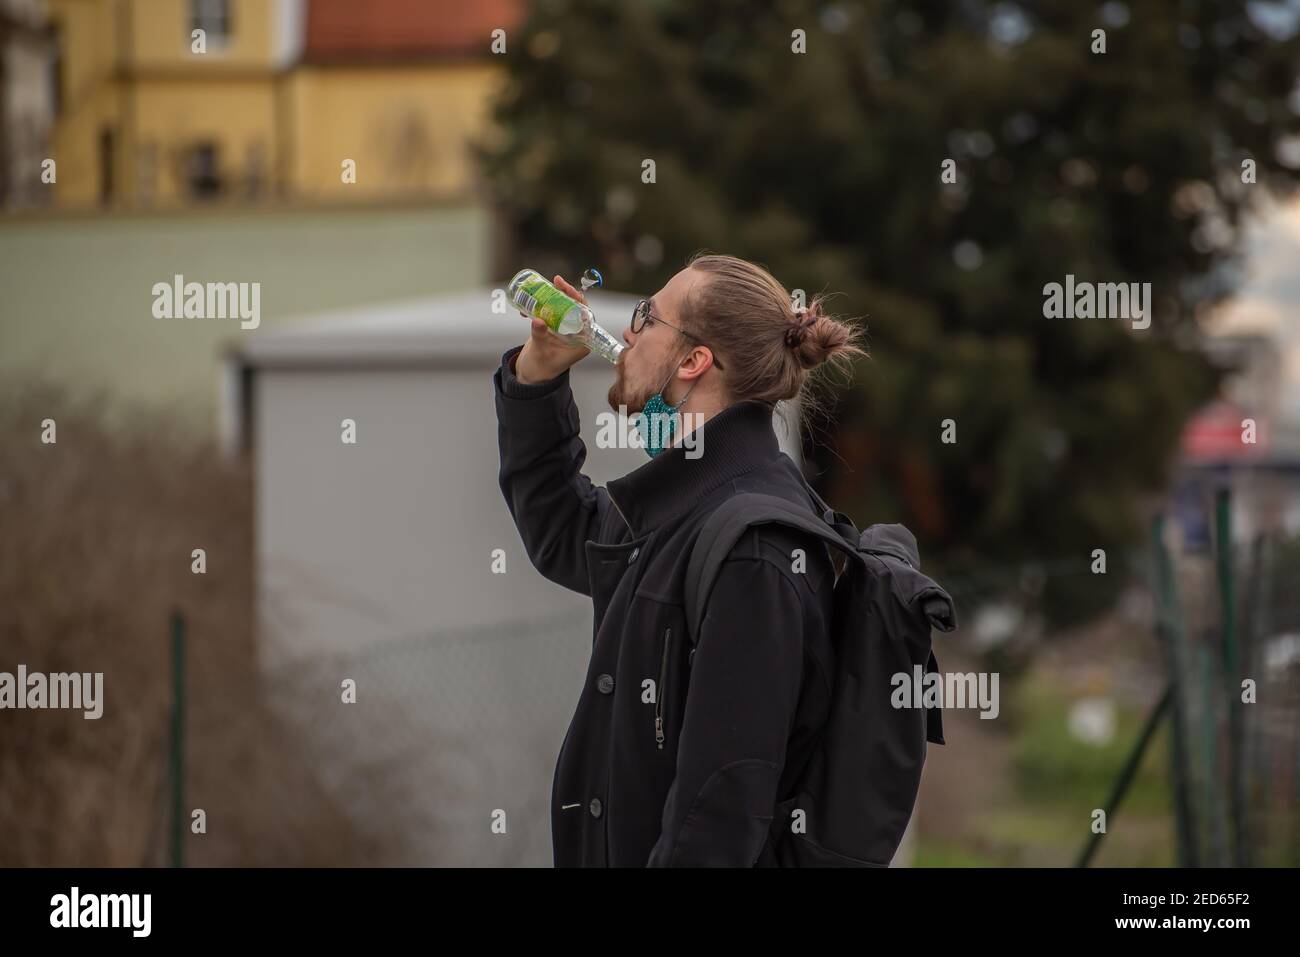 Prague, Czech Republic. 02-13-2021. Young trendy young man is drinking a soda while walking in the city center of Prague during a cold winter day. Stock Photo